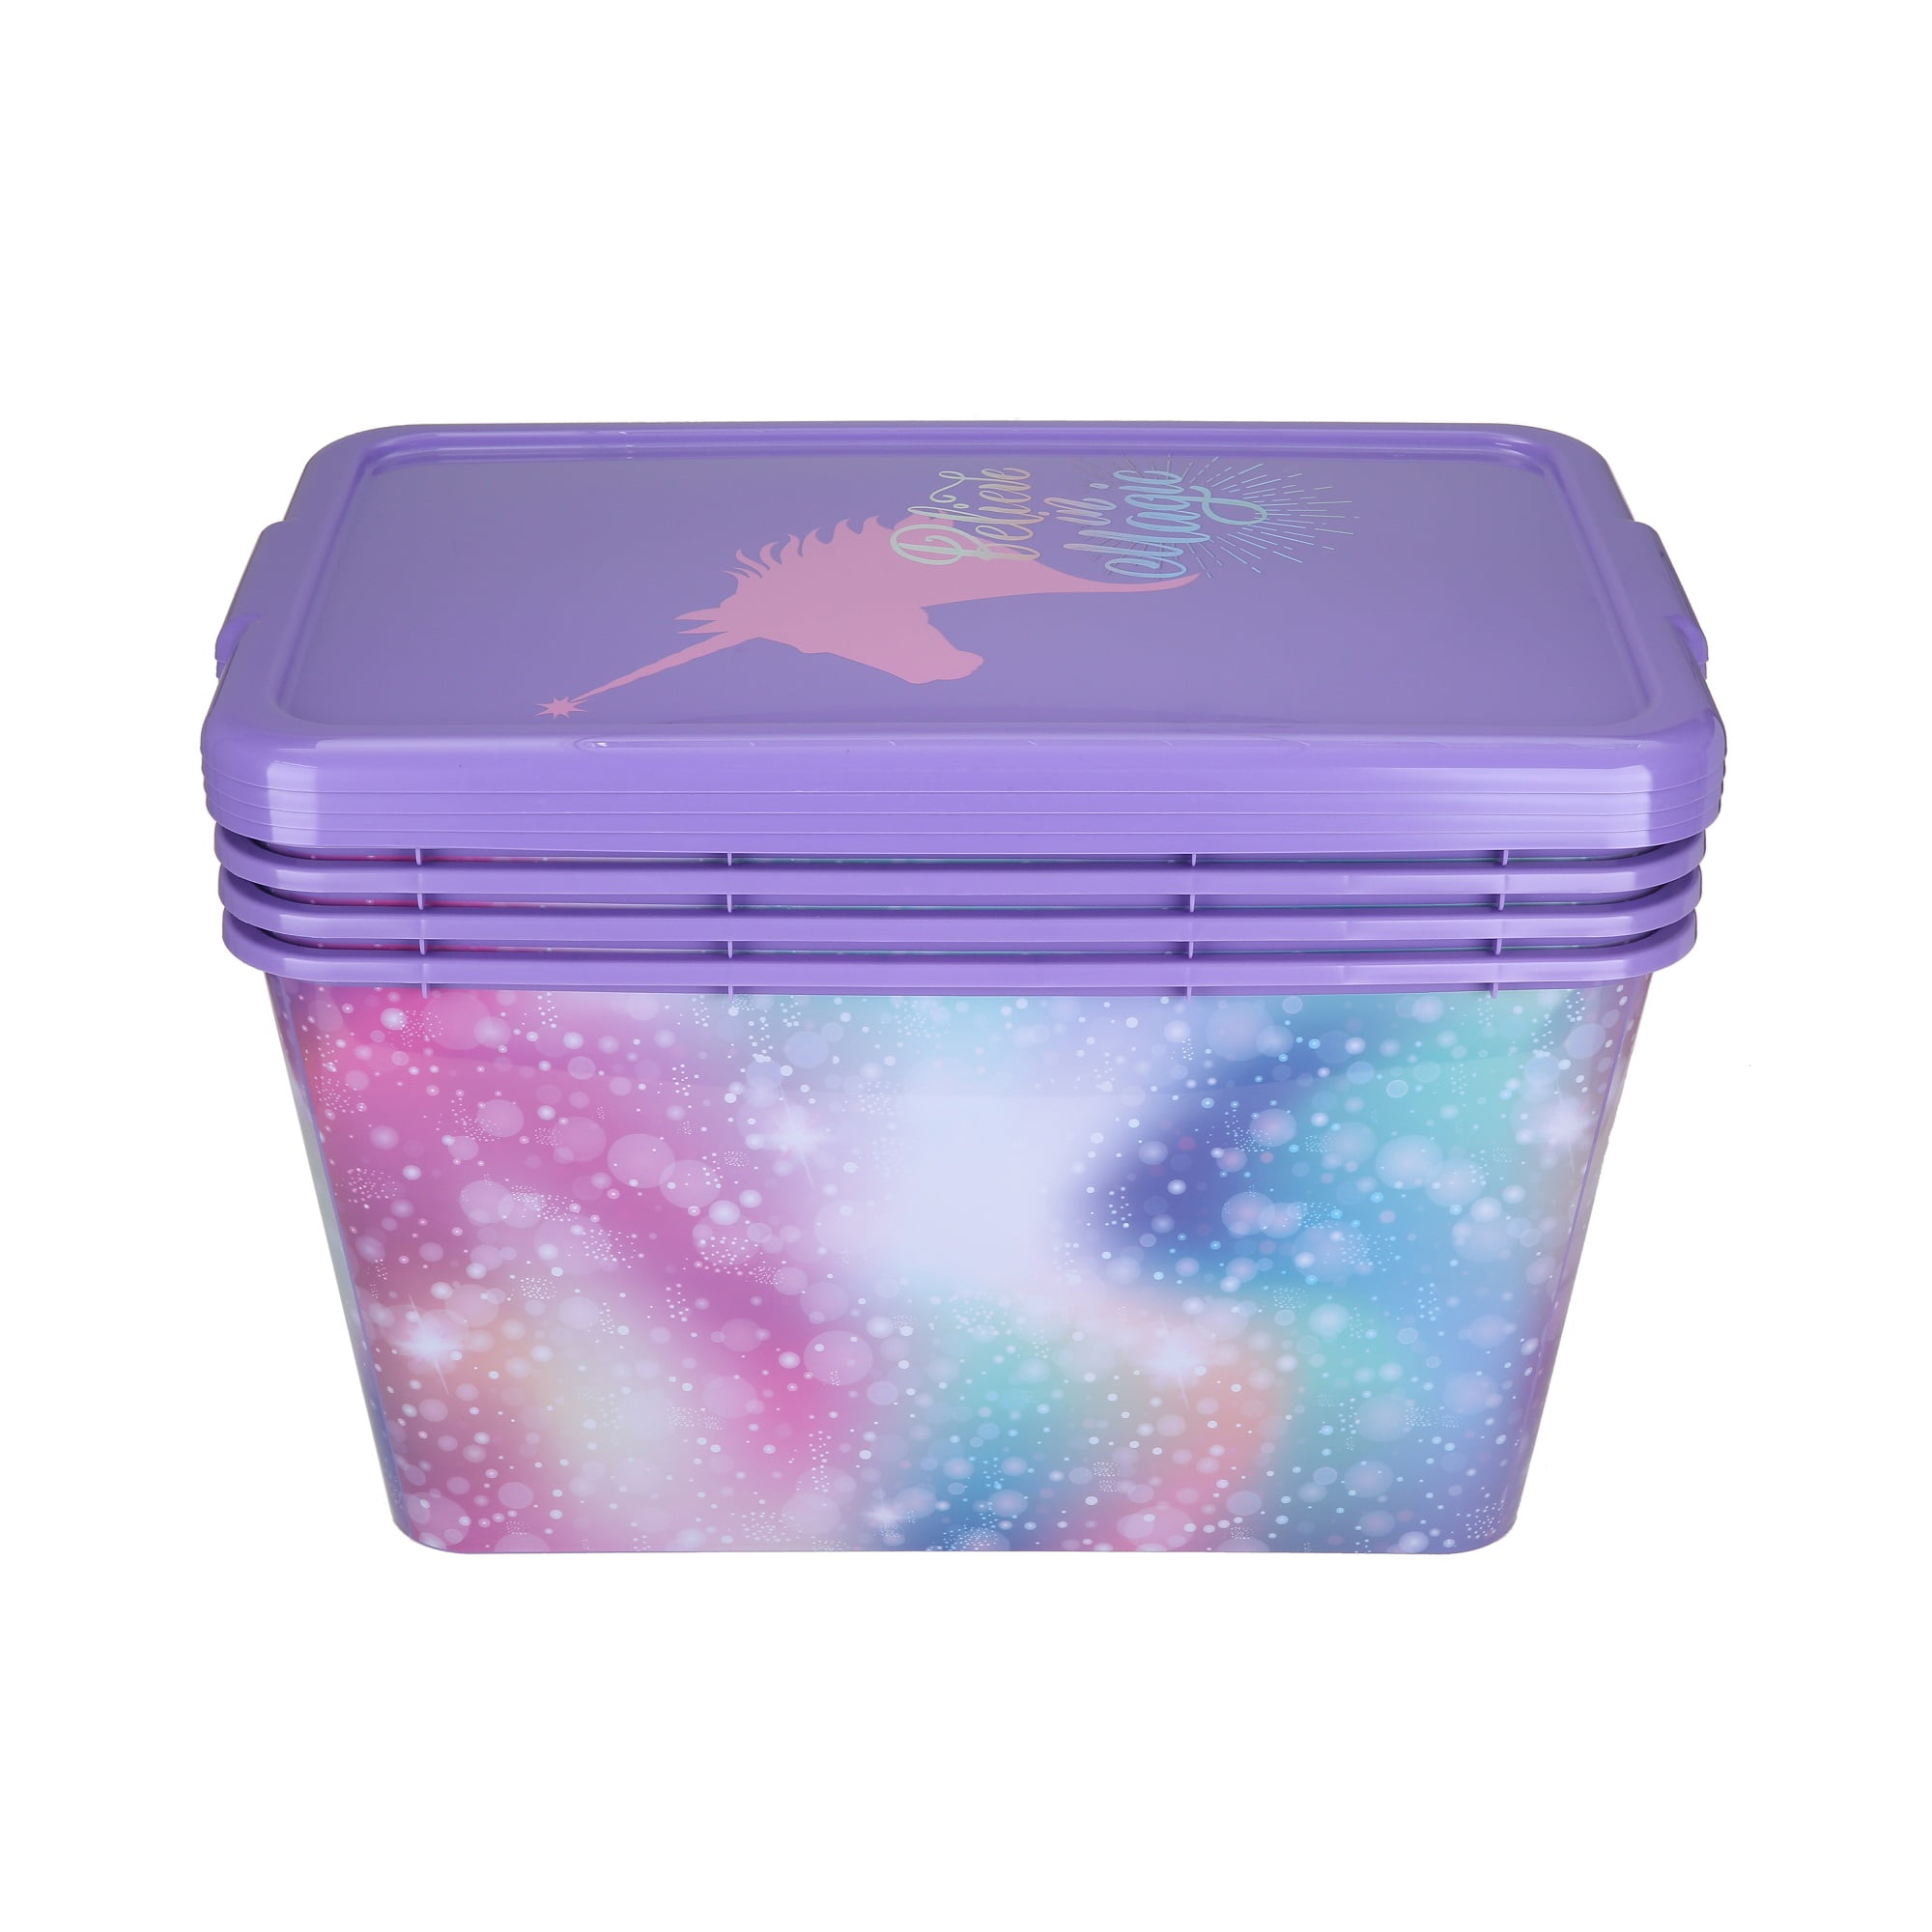 kids toy storage containers